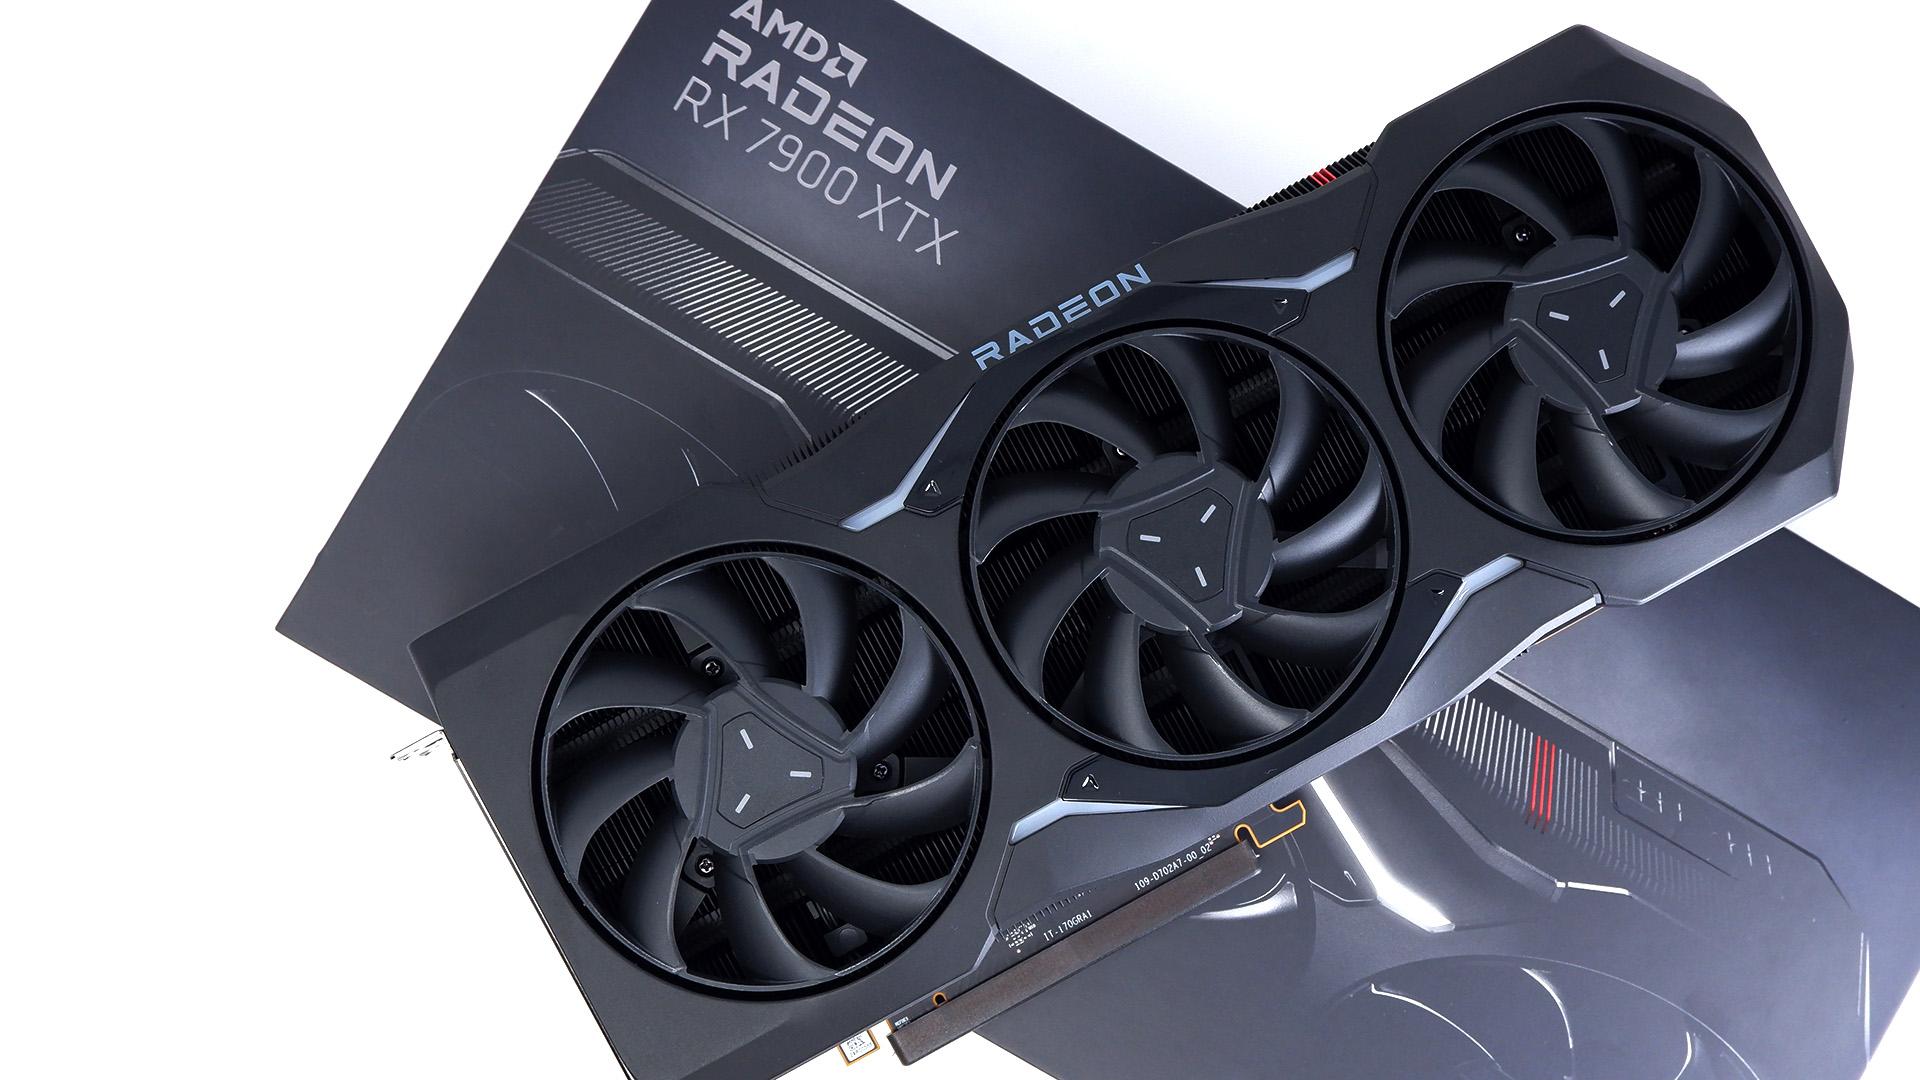 AMD Radeon RX 7900 XTX photographed with box on a white background.